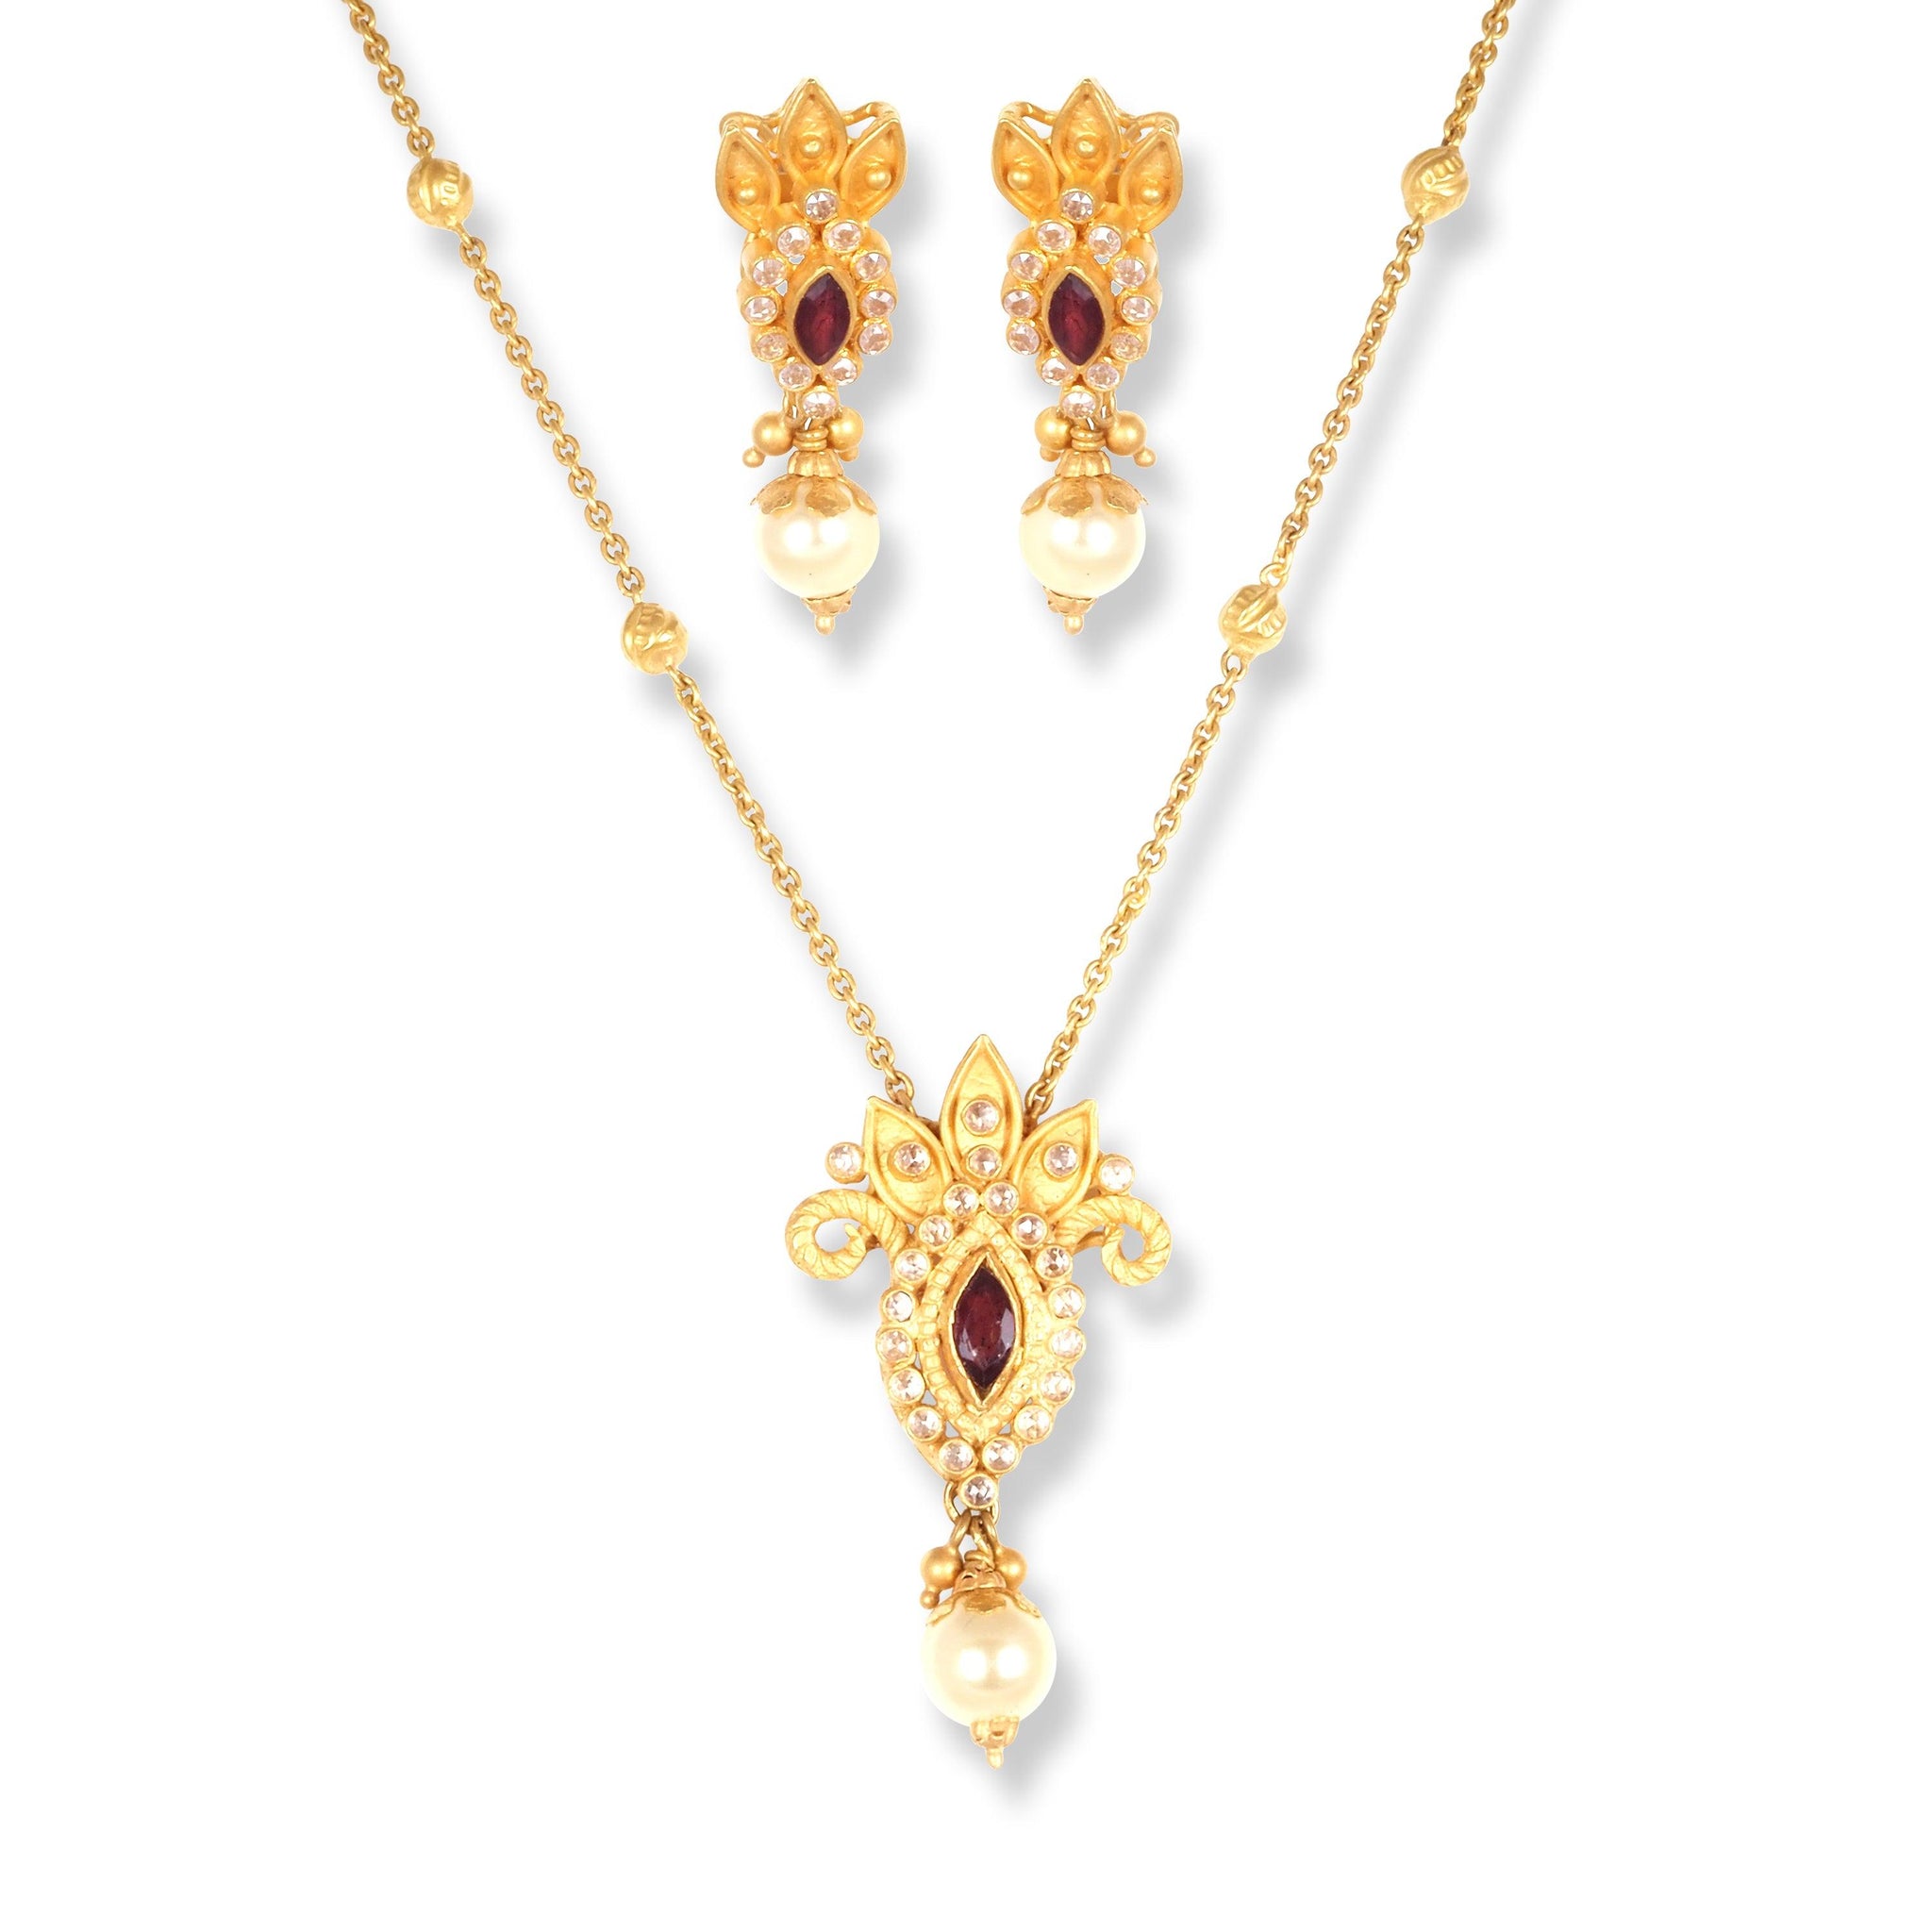 22ct Gold Set with Red & White Cubic Zirconia Stones and Cultured Pearls (Necklace + Drop Earrings)